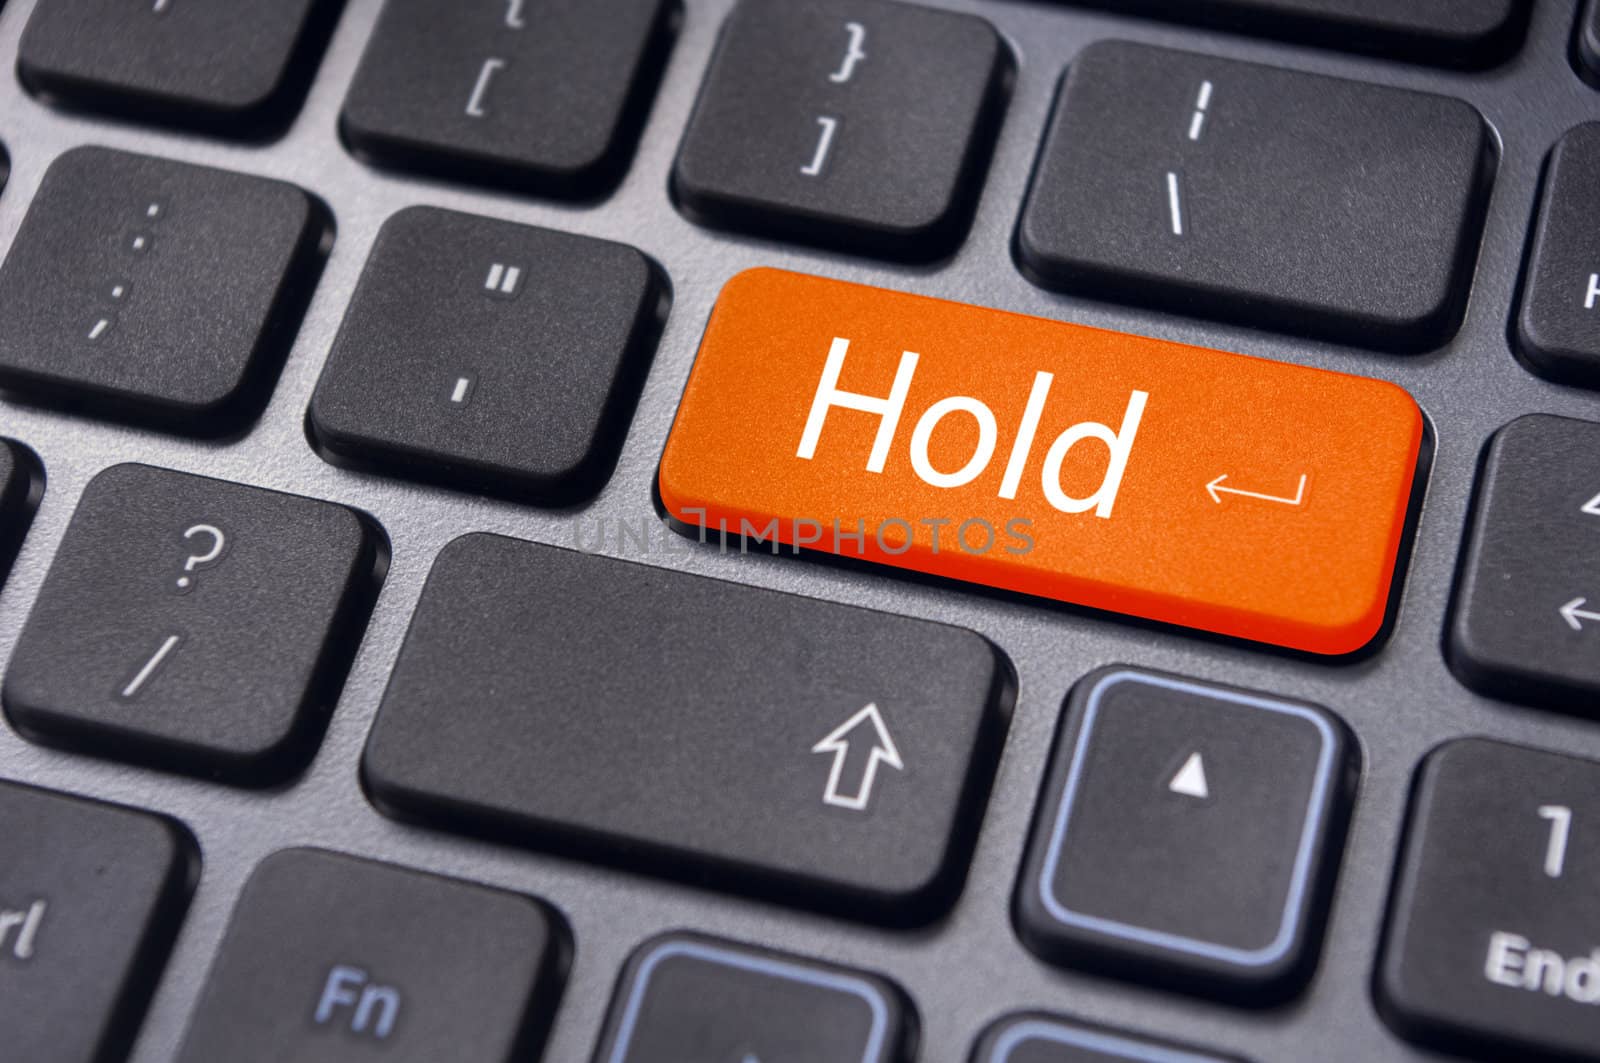 to illustrate hold concepts in stock trading.